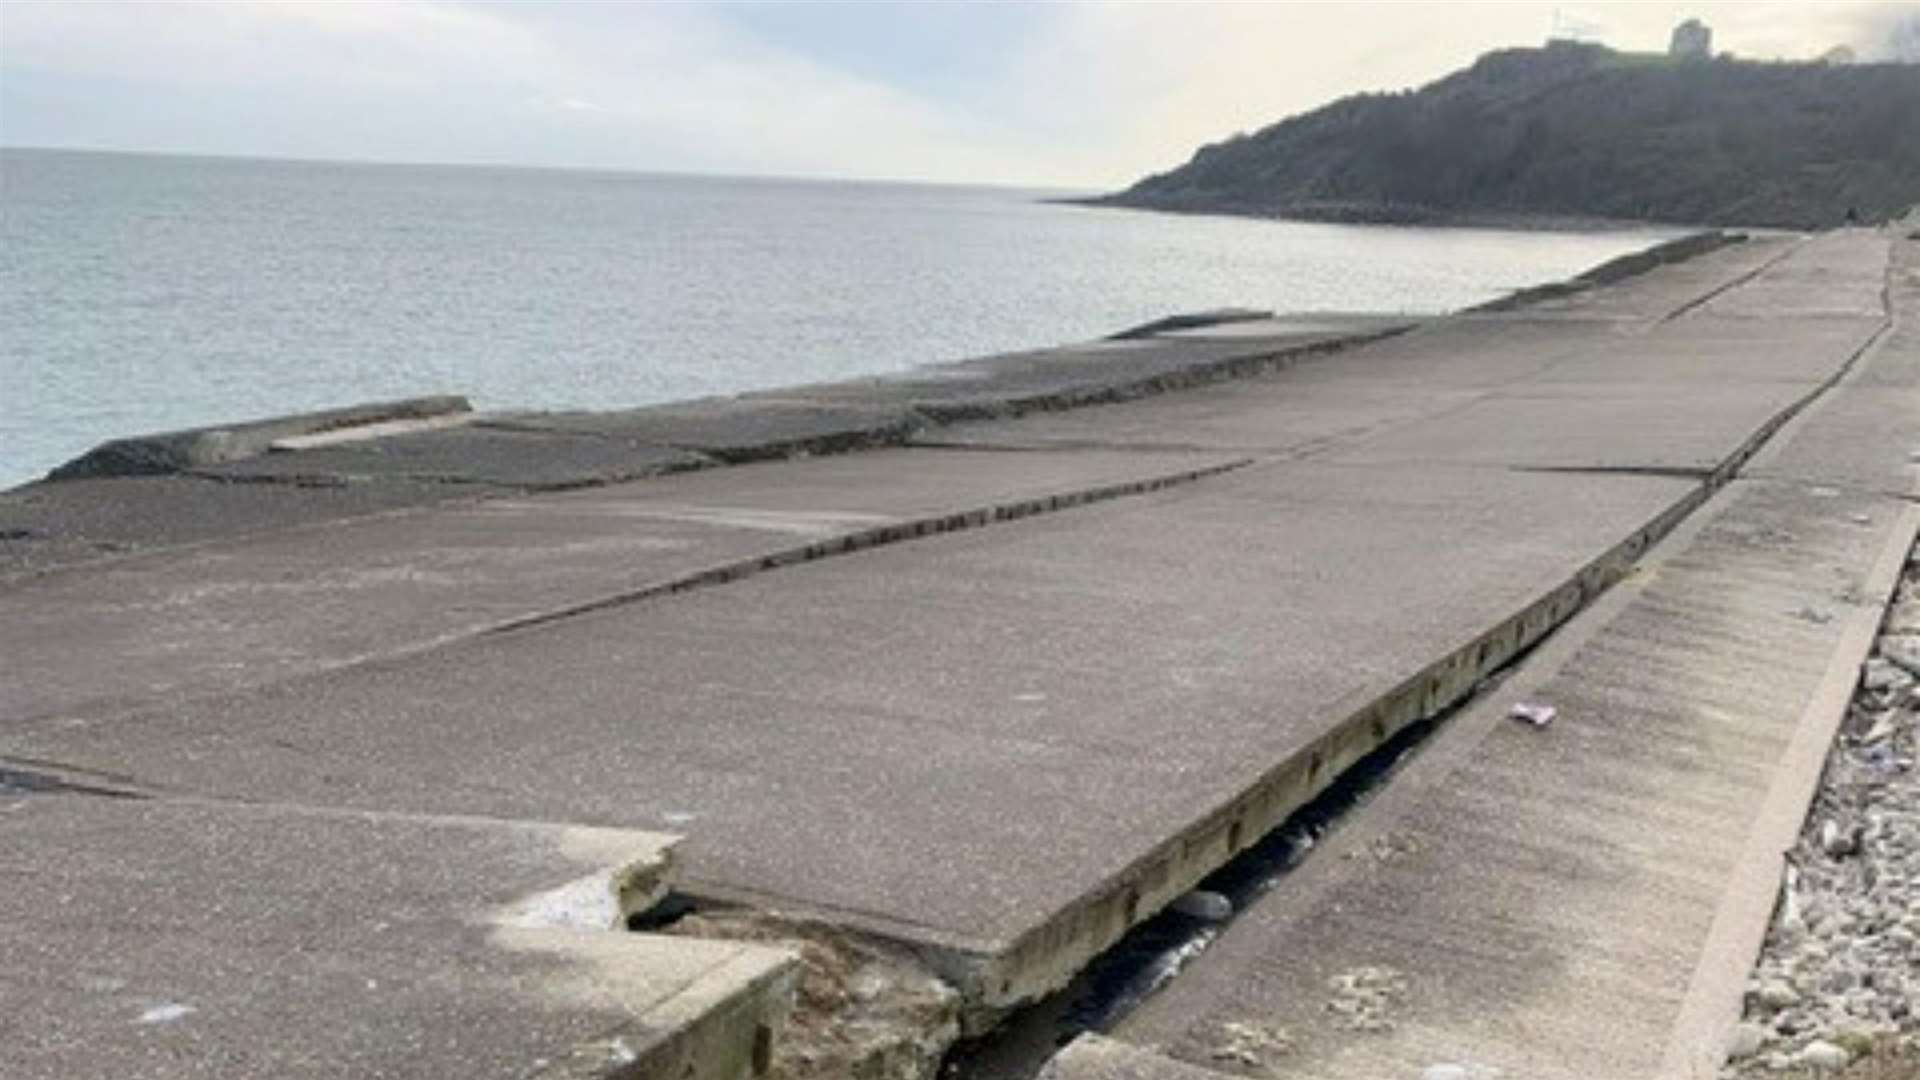 A warning was issued in March after uneven surfaces were spotted in Folkestone. Picture: Folkestone and Hythe District Council